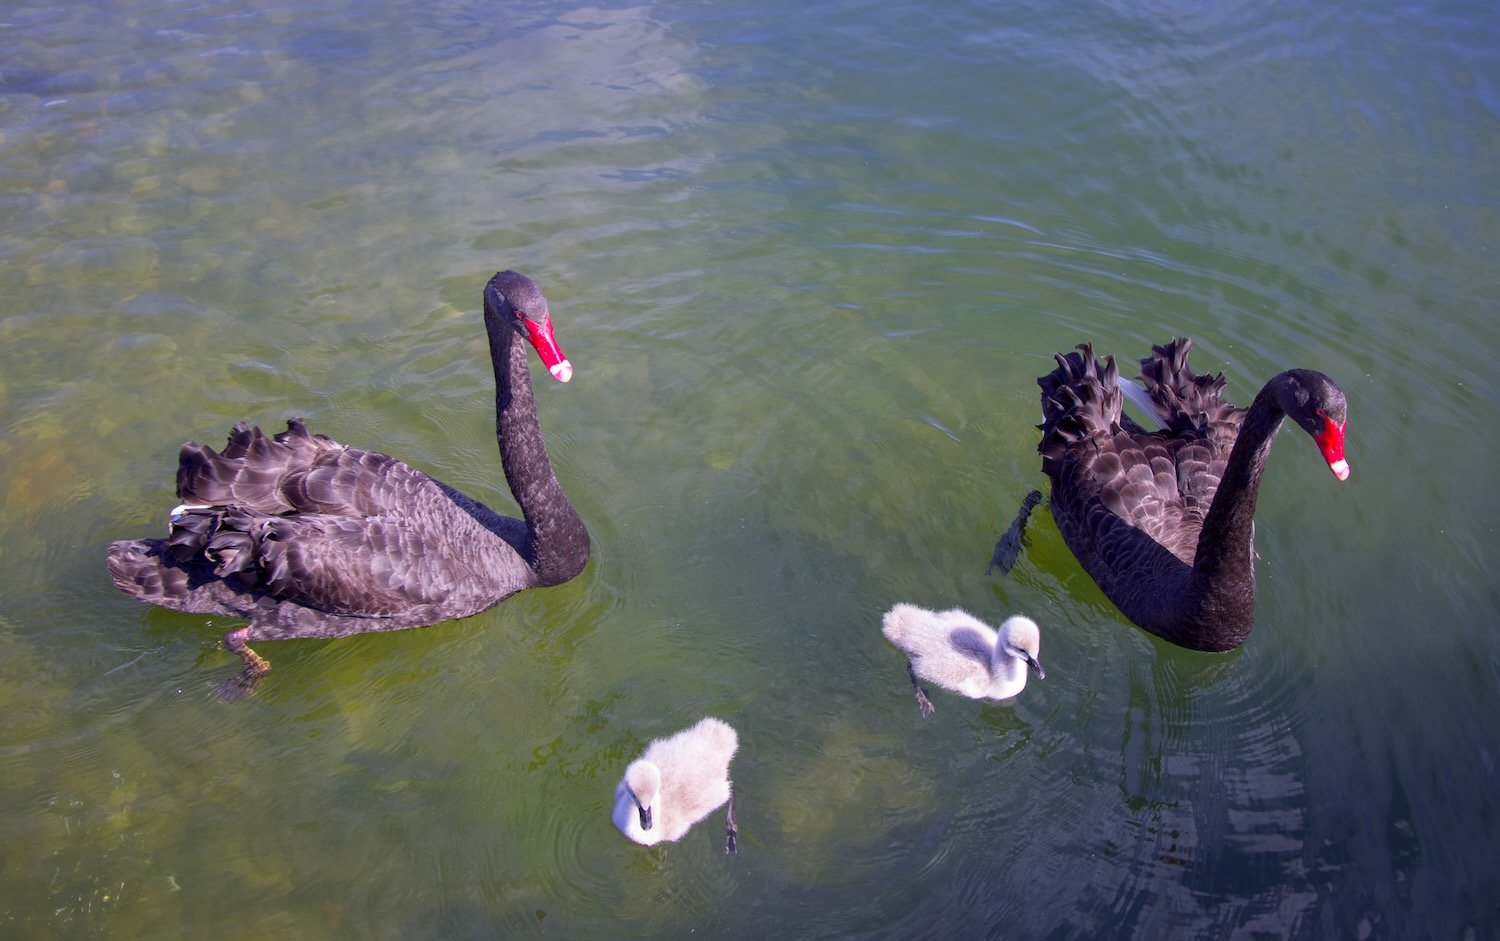 Black swans with babies